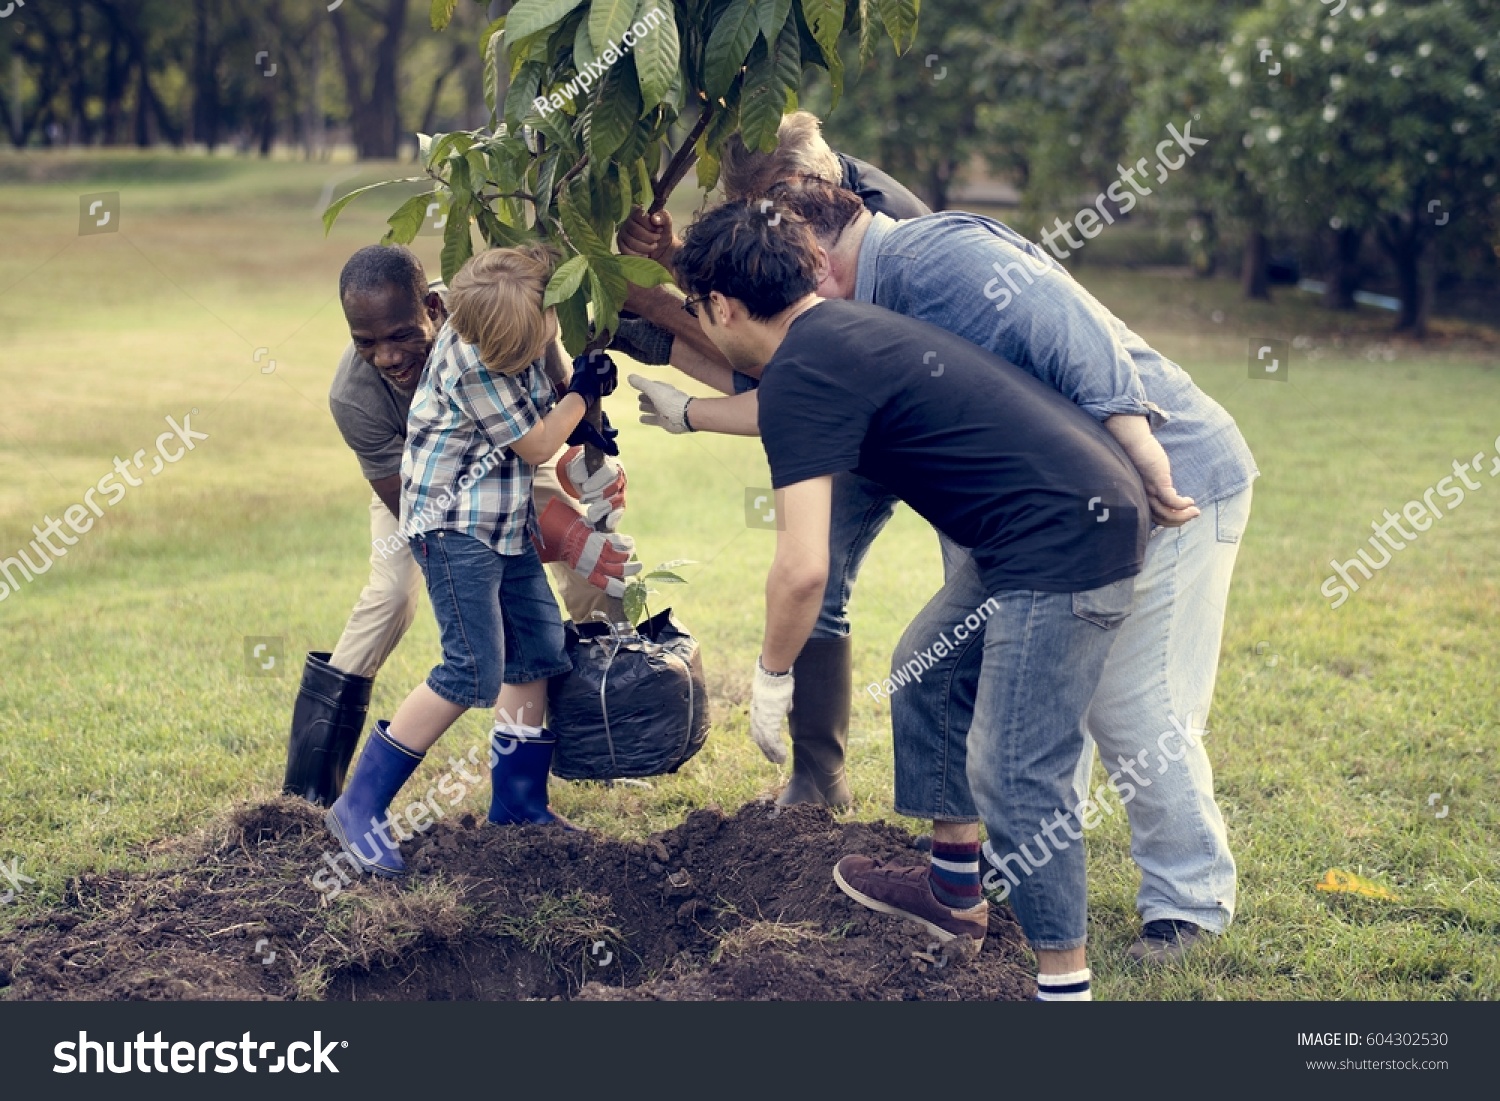 Group of Diverse People Planting Tree Together #604302530